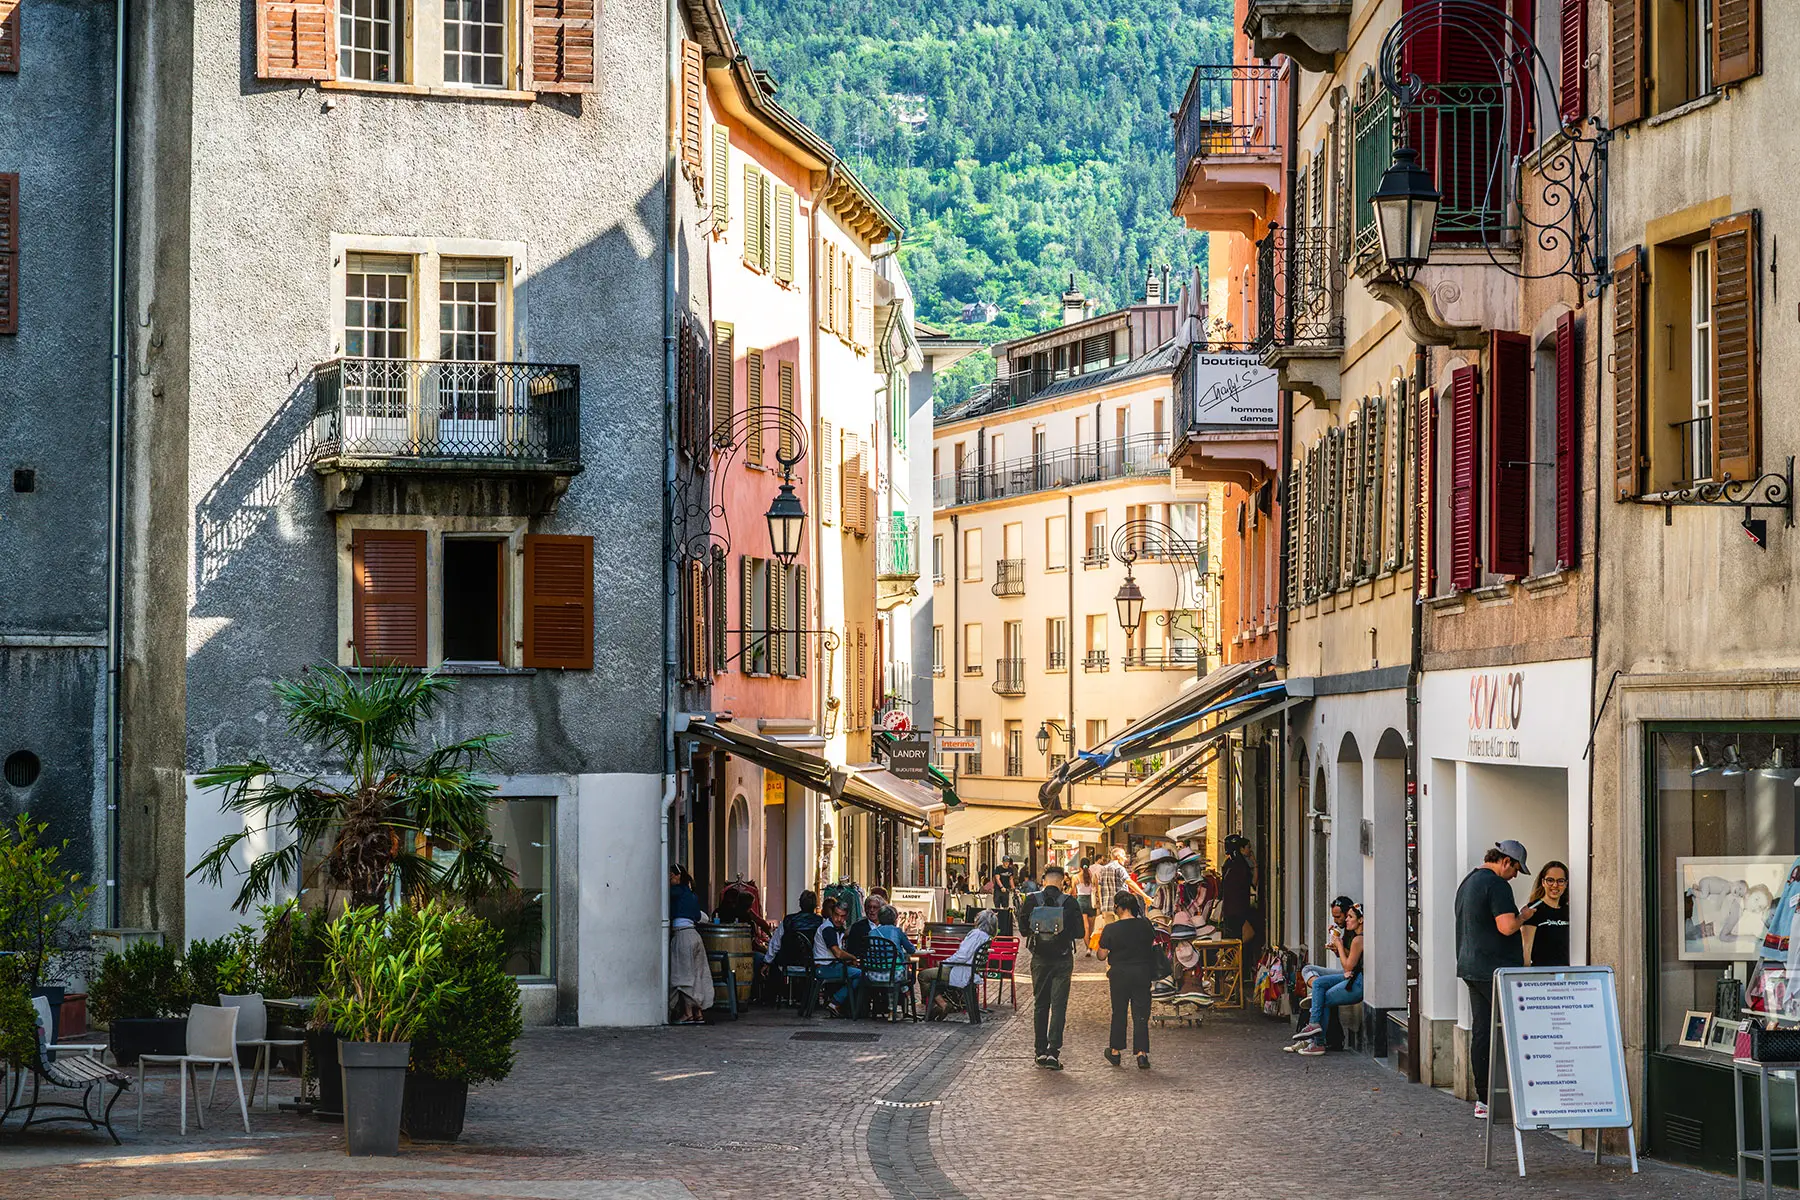 Sion, the capital of Valais